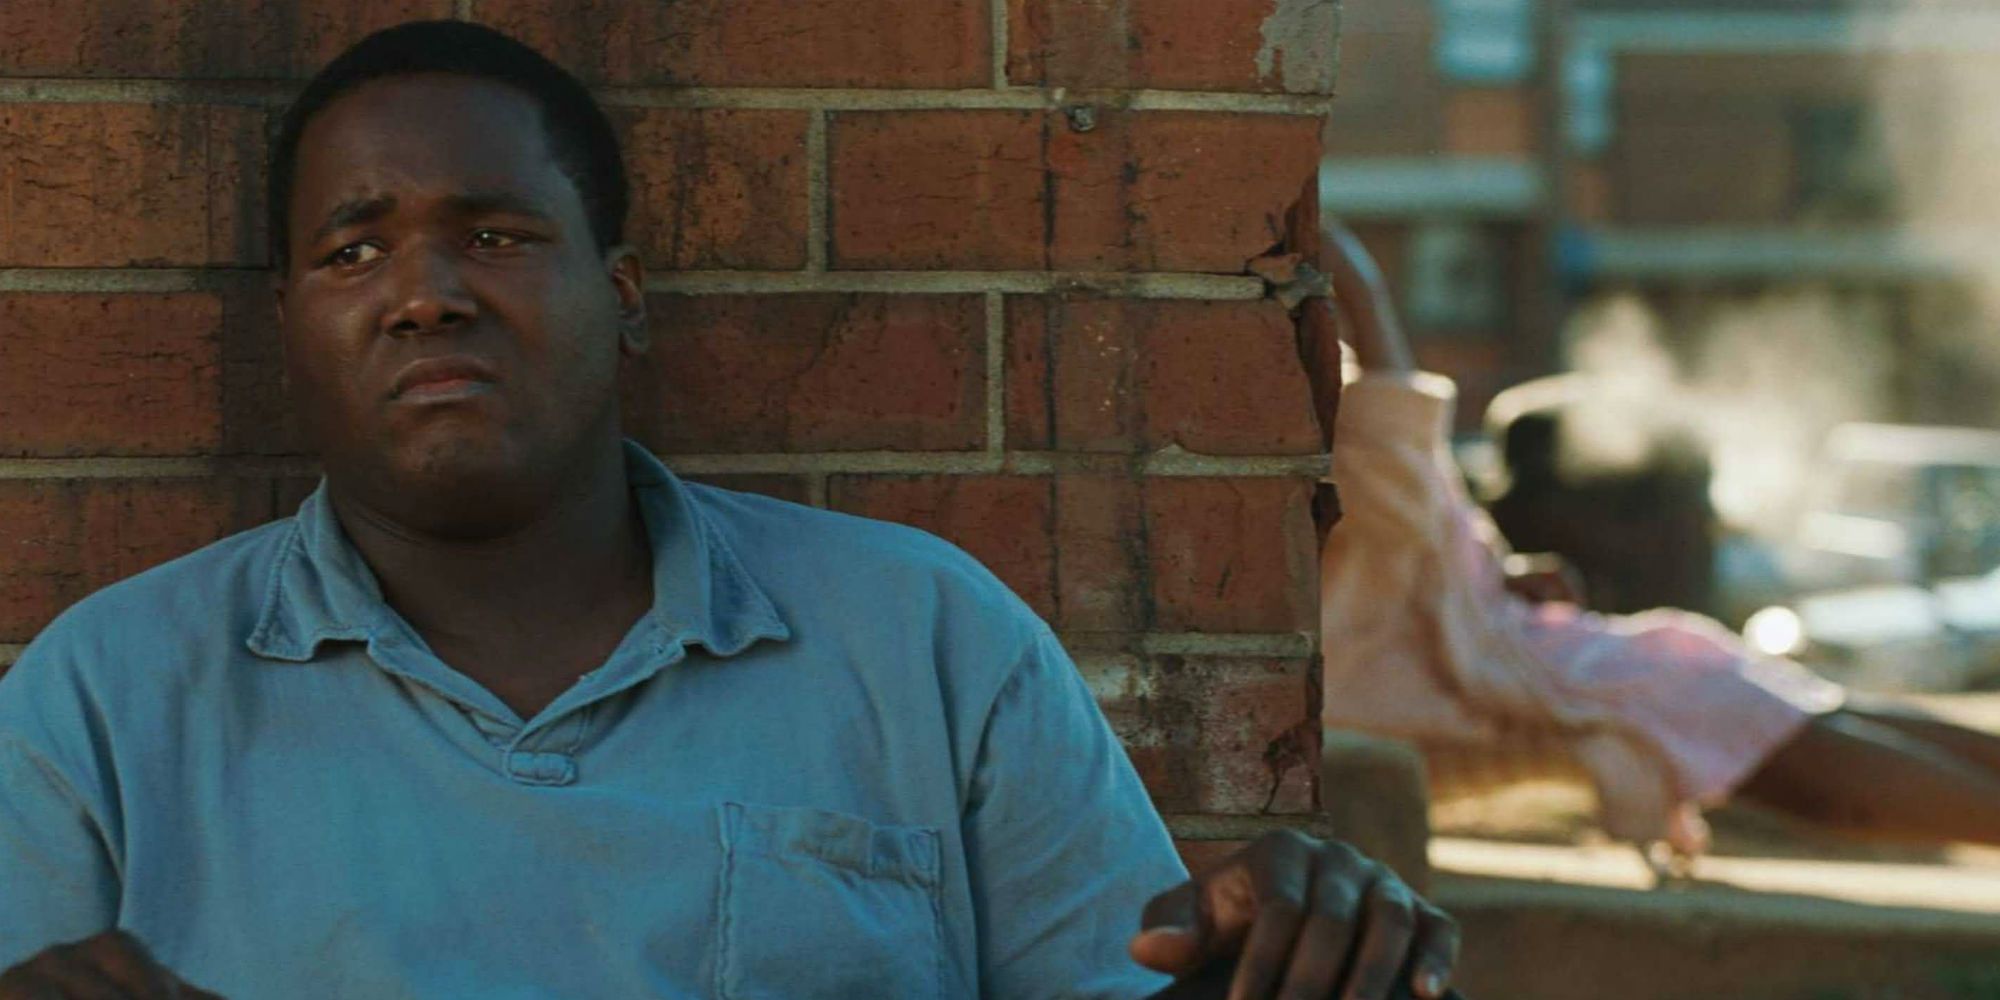 Michael Oher leans against a wall in The Blind Side